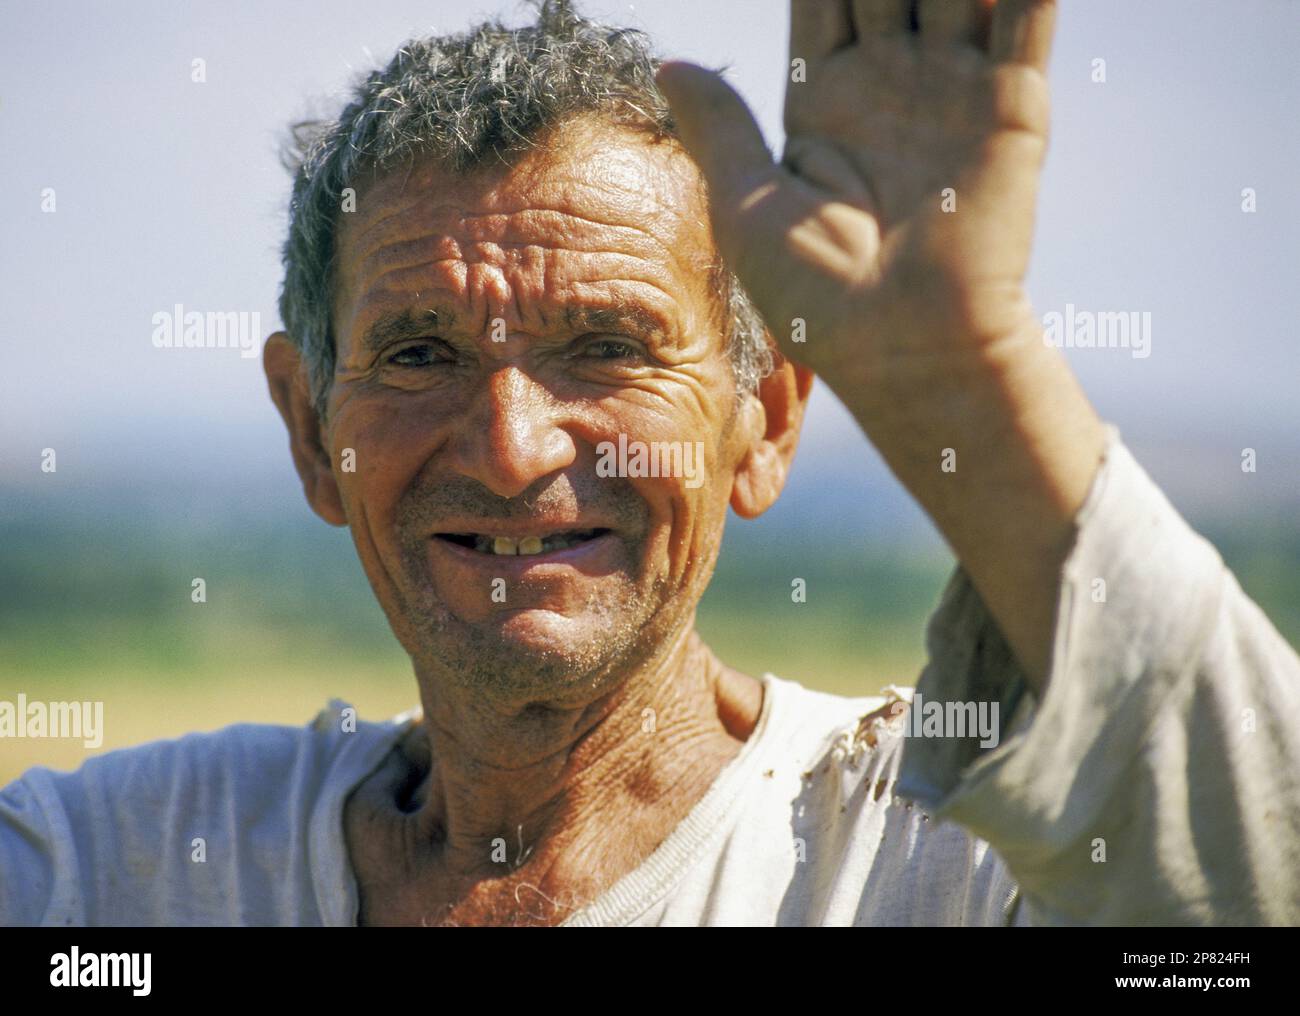 A middle-aged peasant farmer in southwestern Bulgaria waves to passers-by Stock Photo